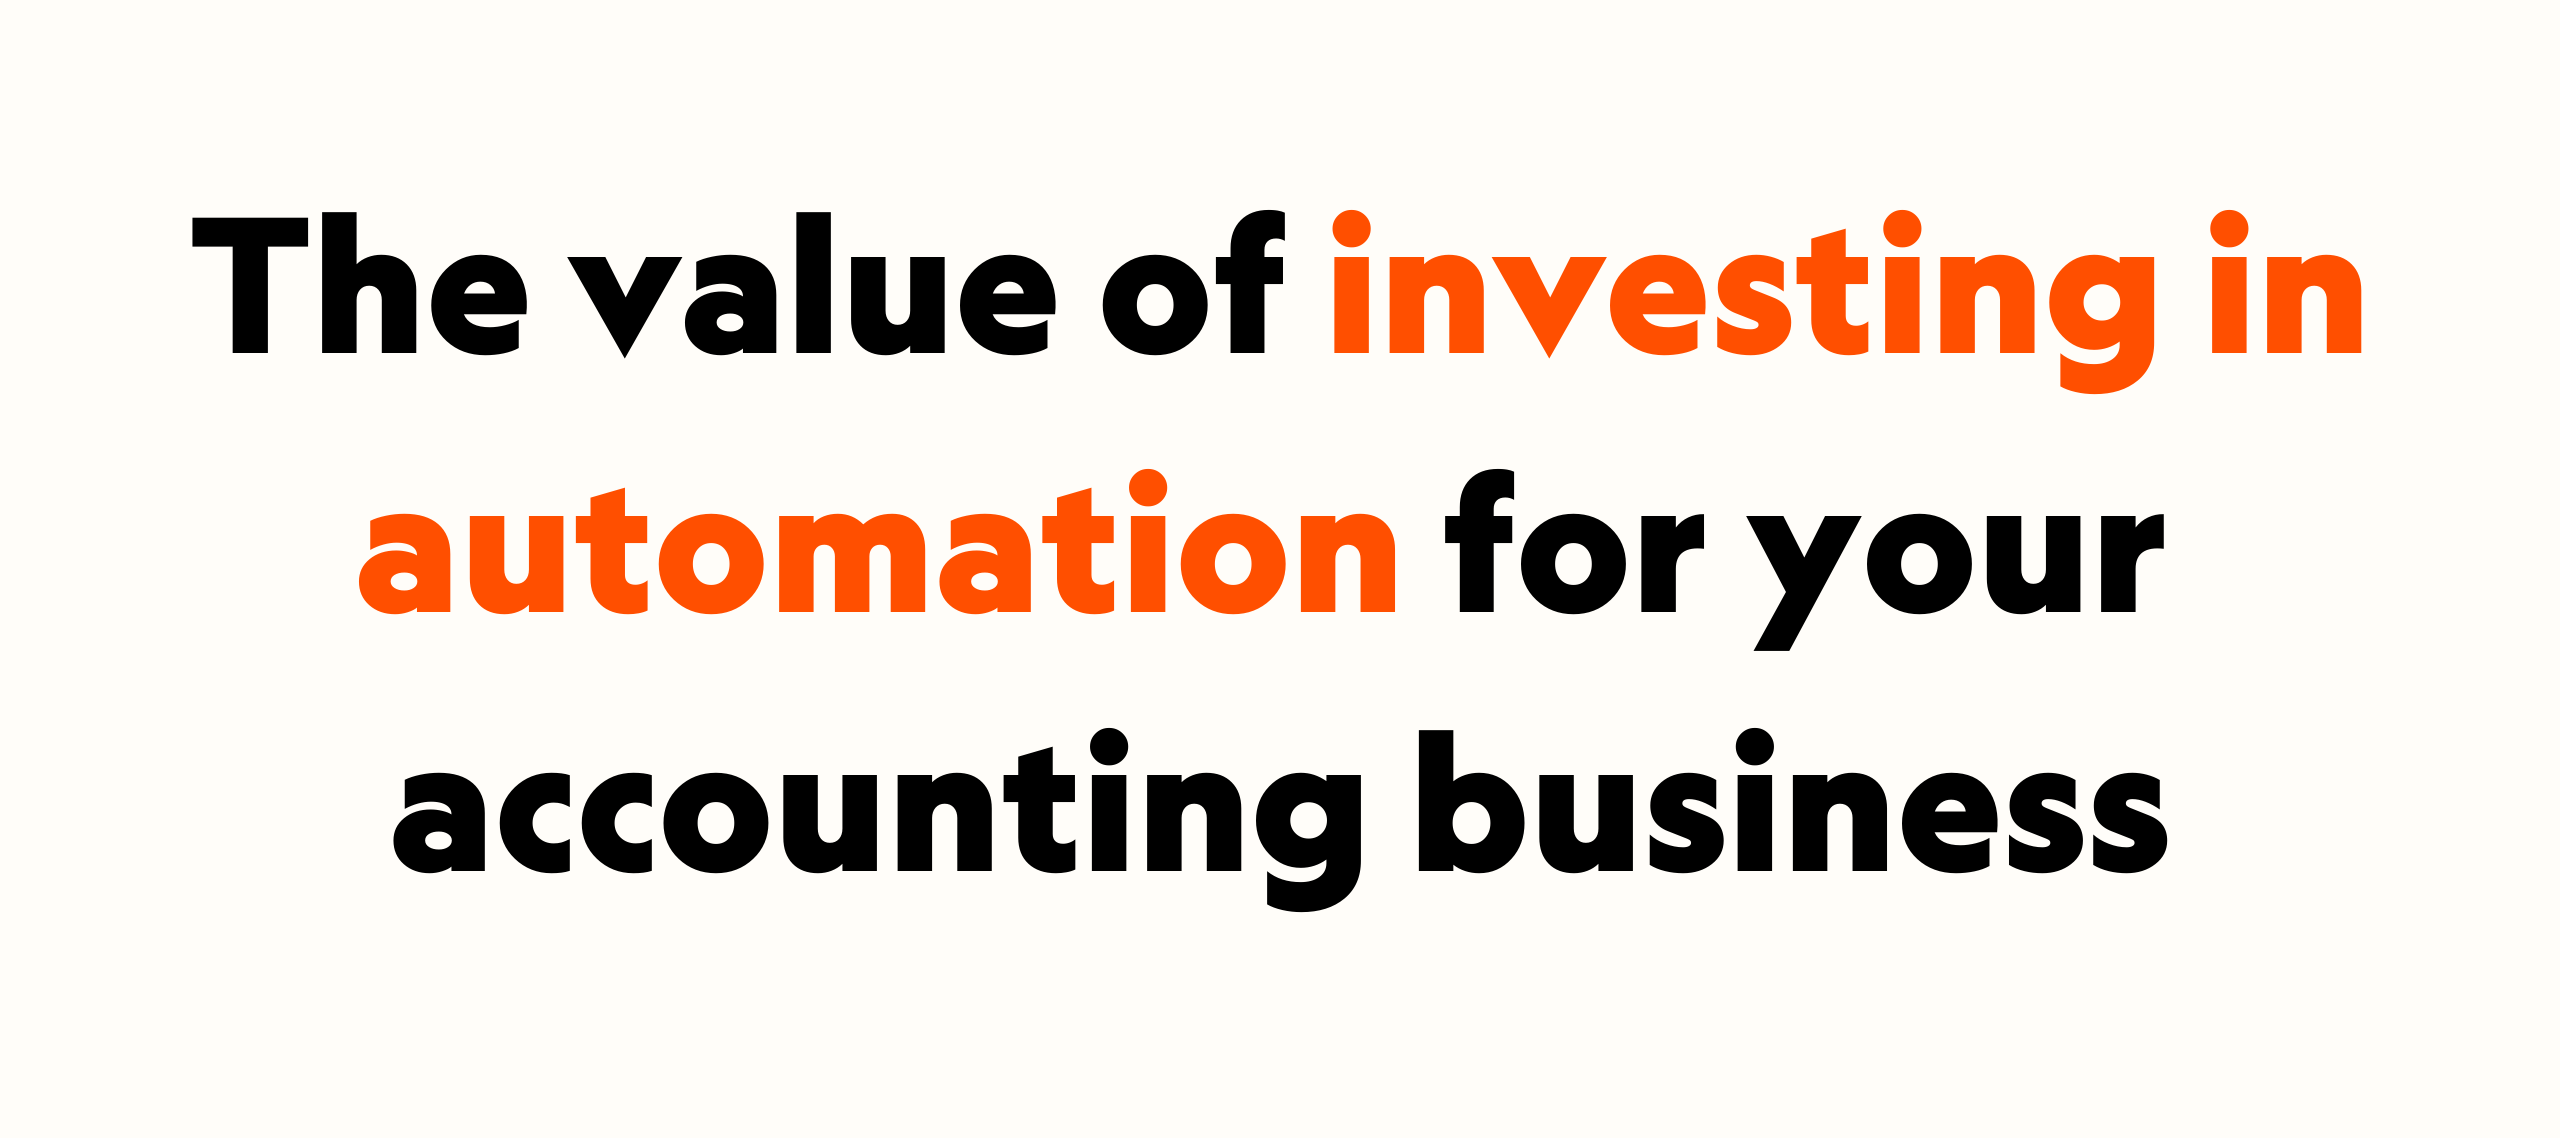 The value of investing in automation for your accounting business